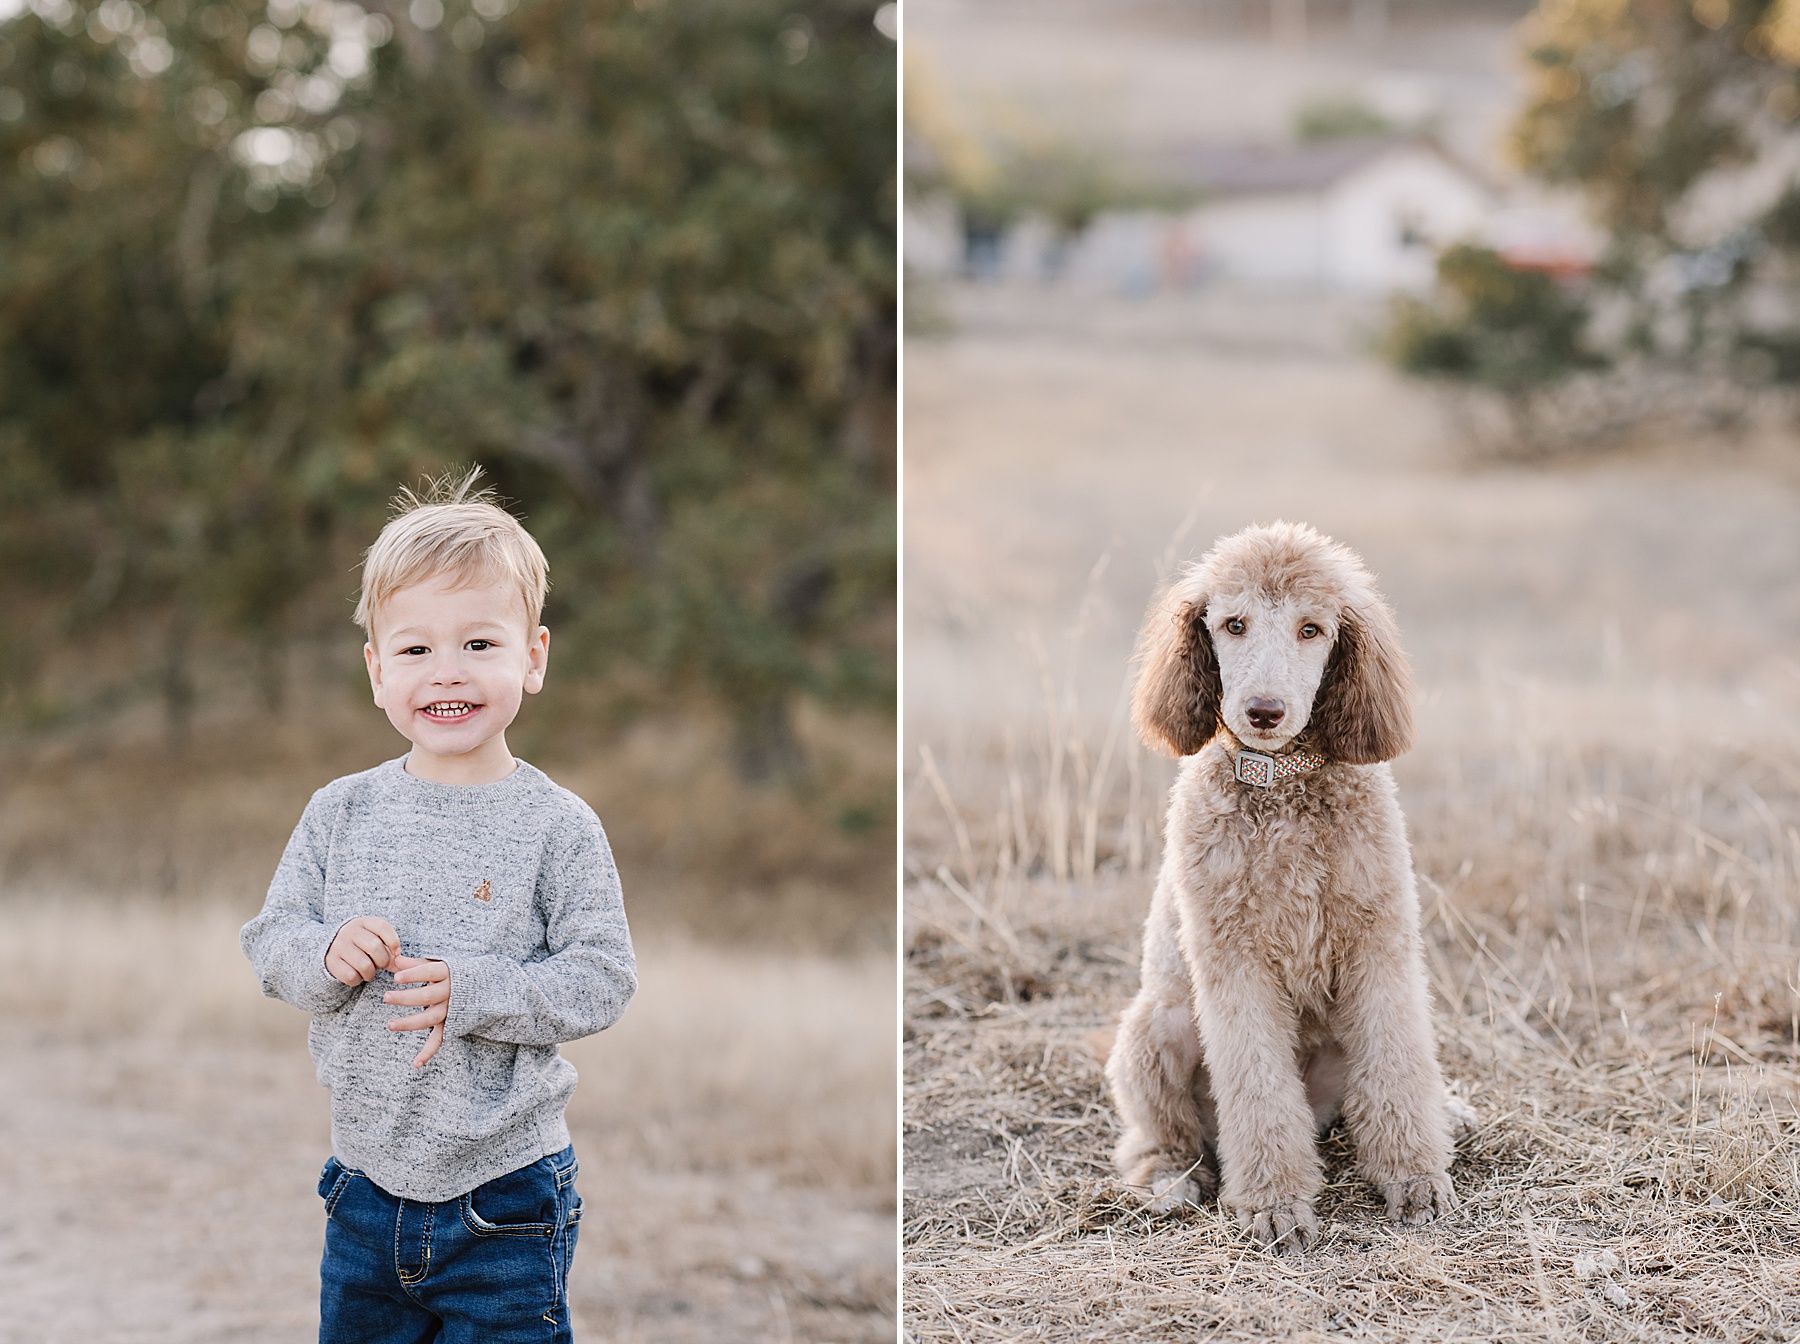 How to Get the Perfect Family Photo | From a San Luis Obispo Photographer